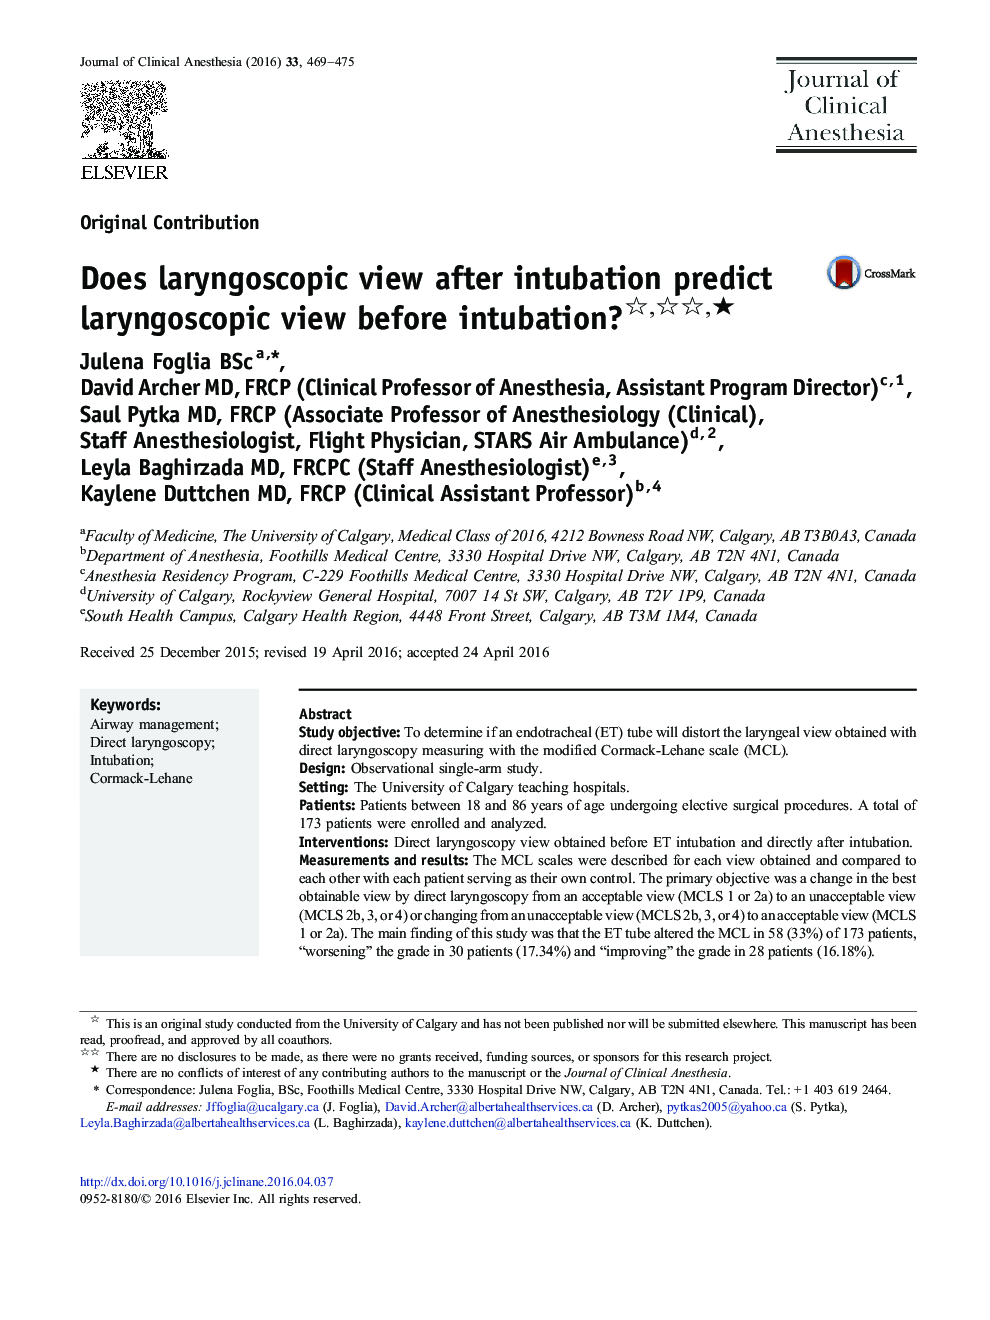 Does laryngoscopic view after intubation predict laryngoscopic view before intubation? ★